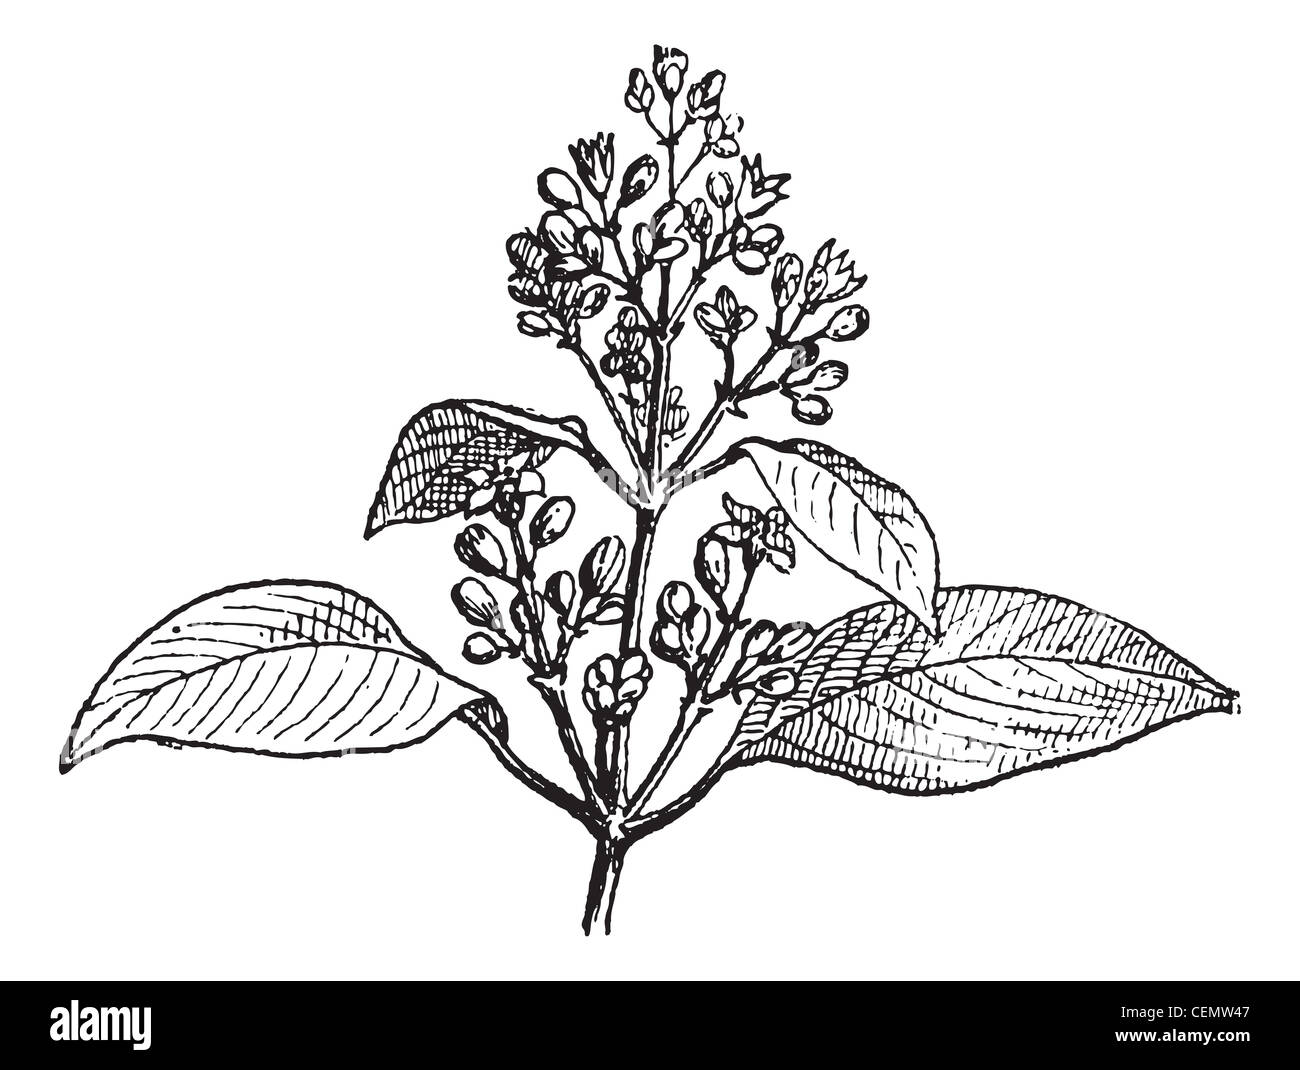 Sandalwood leaves and buds, vintage engraved illustration. Dictionary of words and things - Larive and Fleury - 1895. Stock Photo